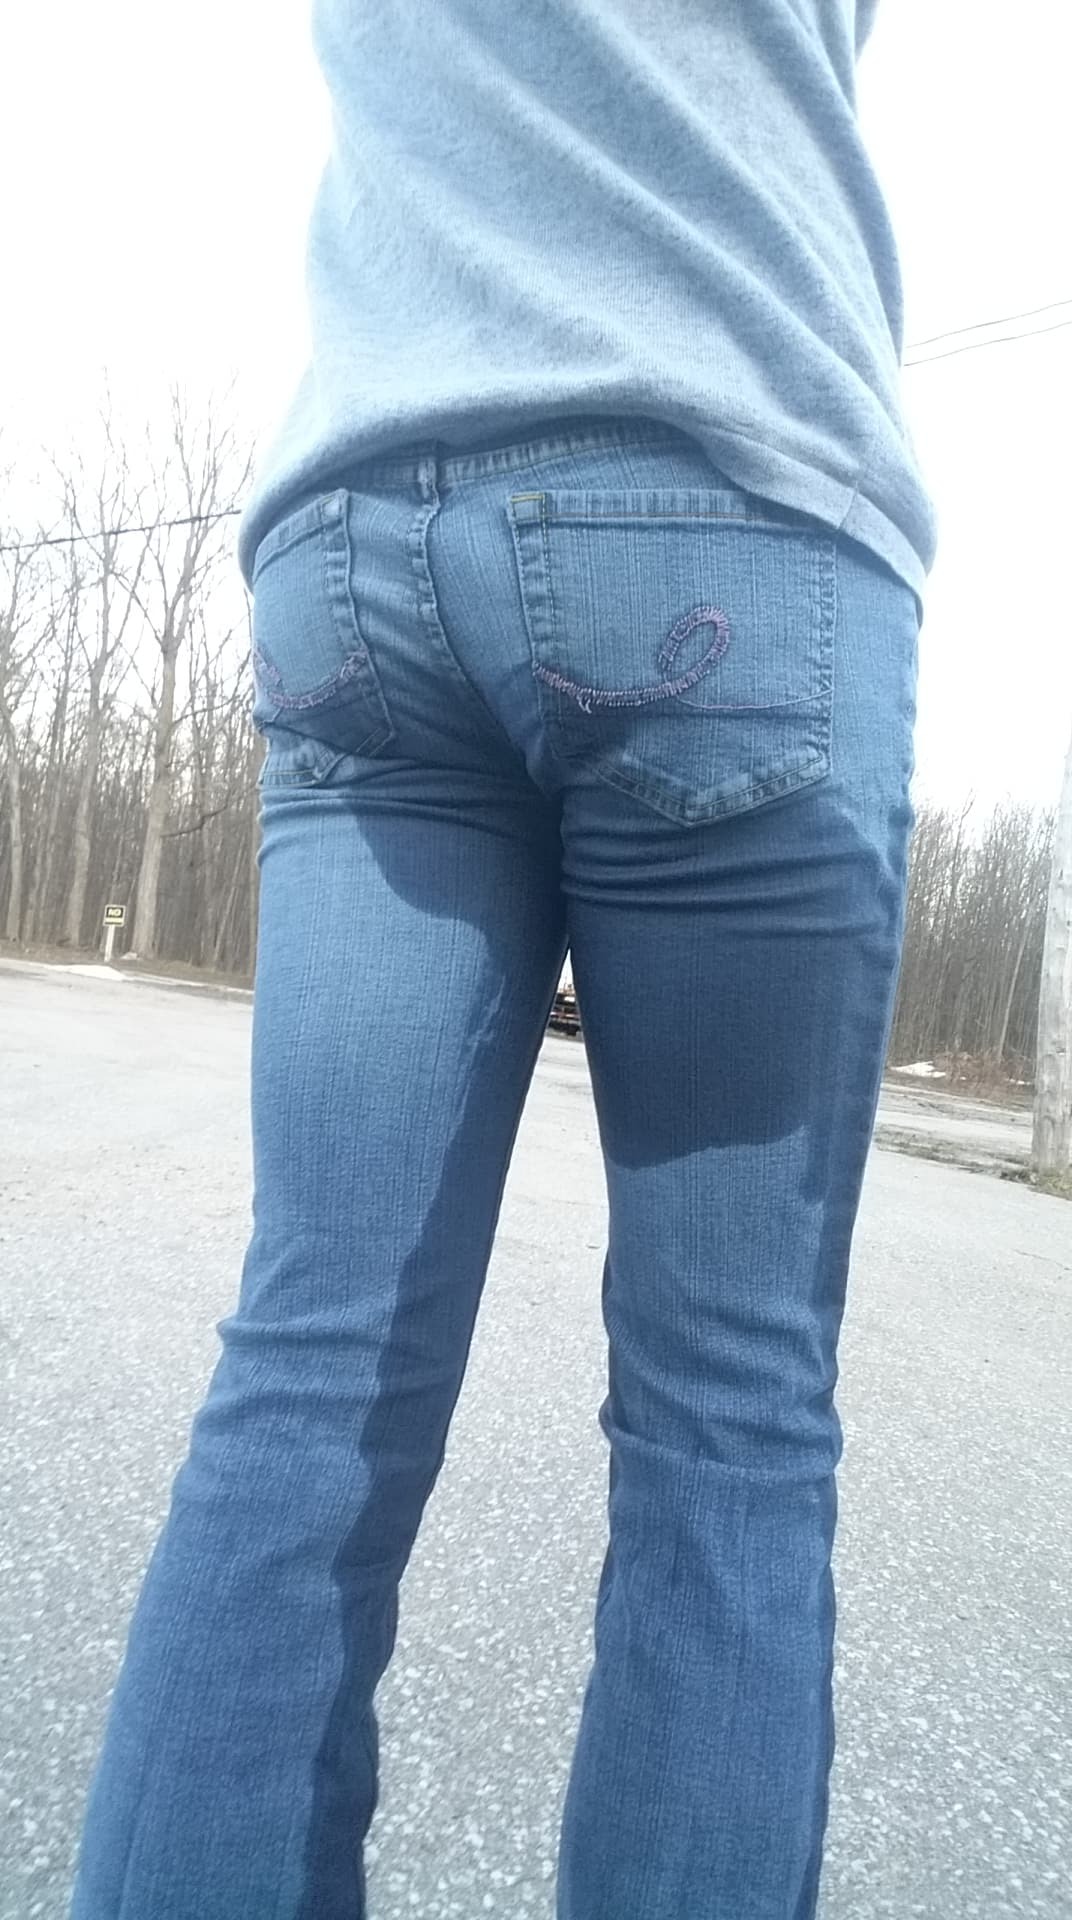 alex-the-abdl:  so I started to have an accident the other day while I was in the